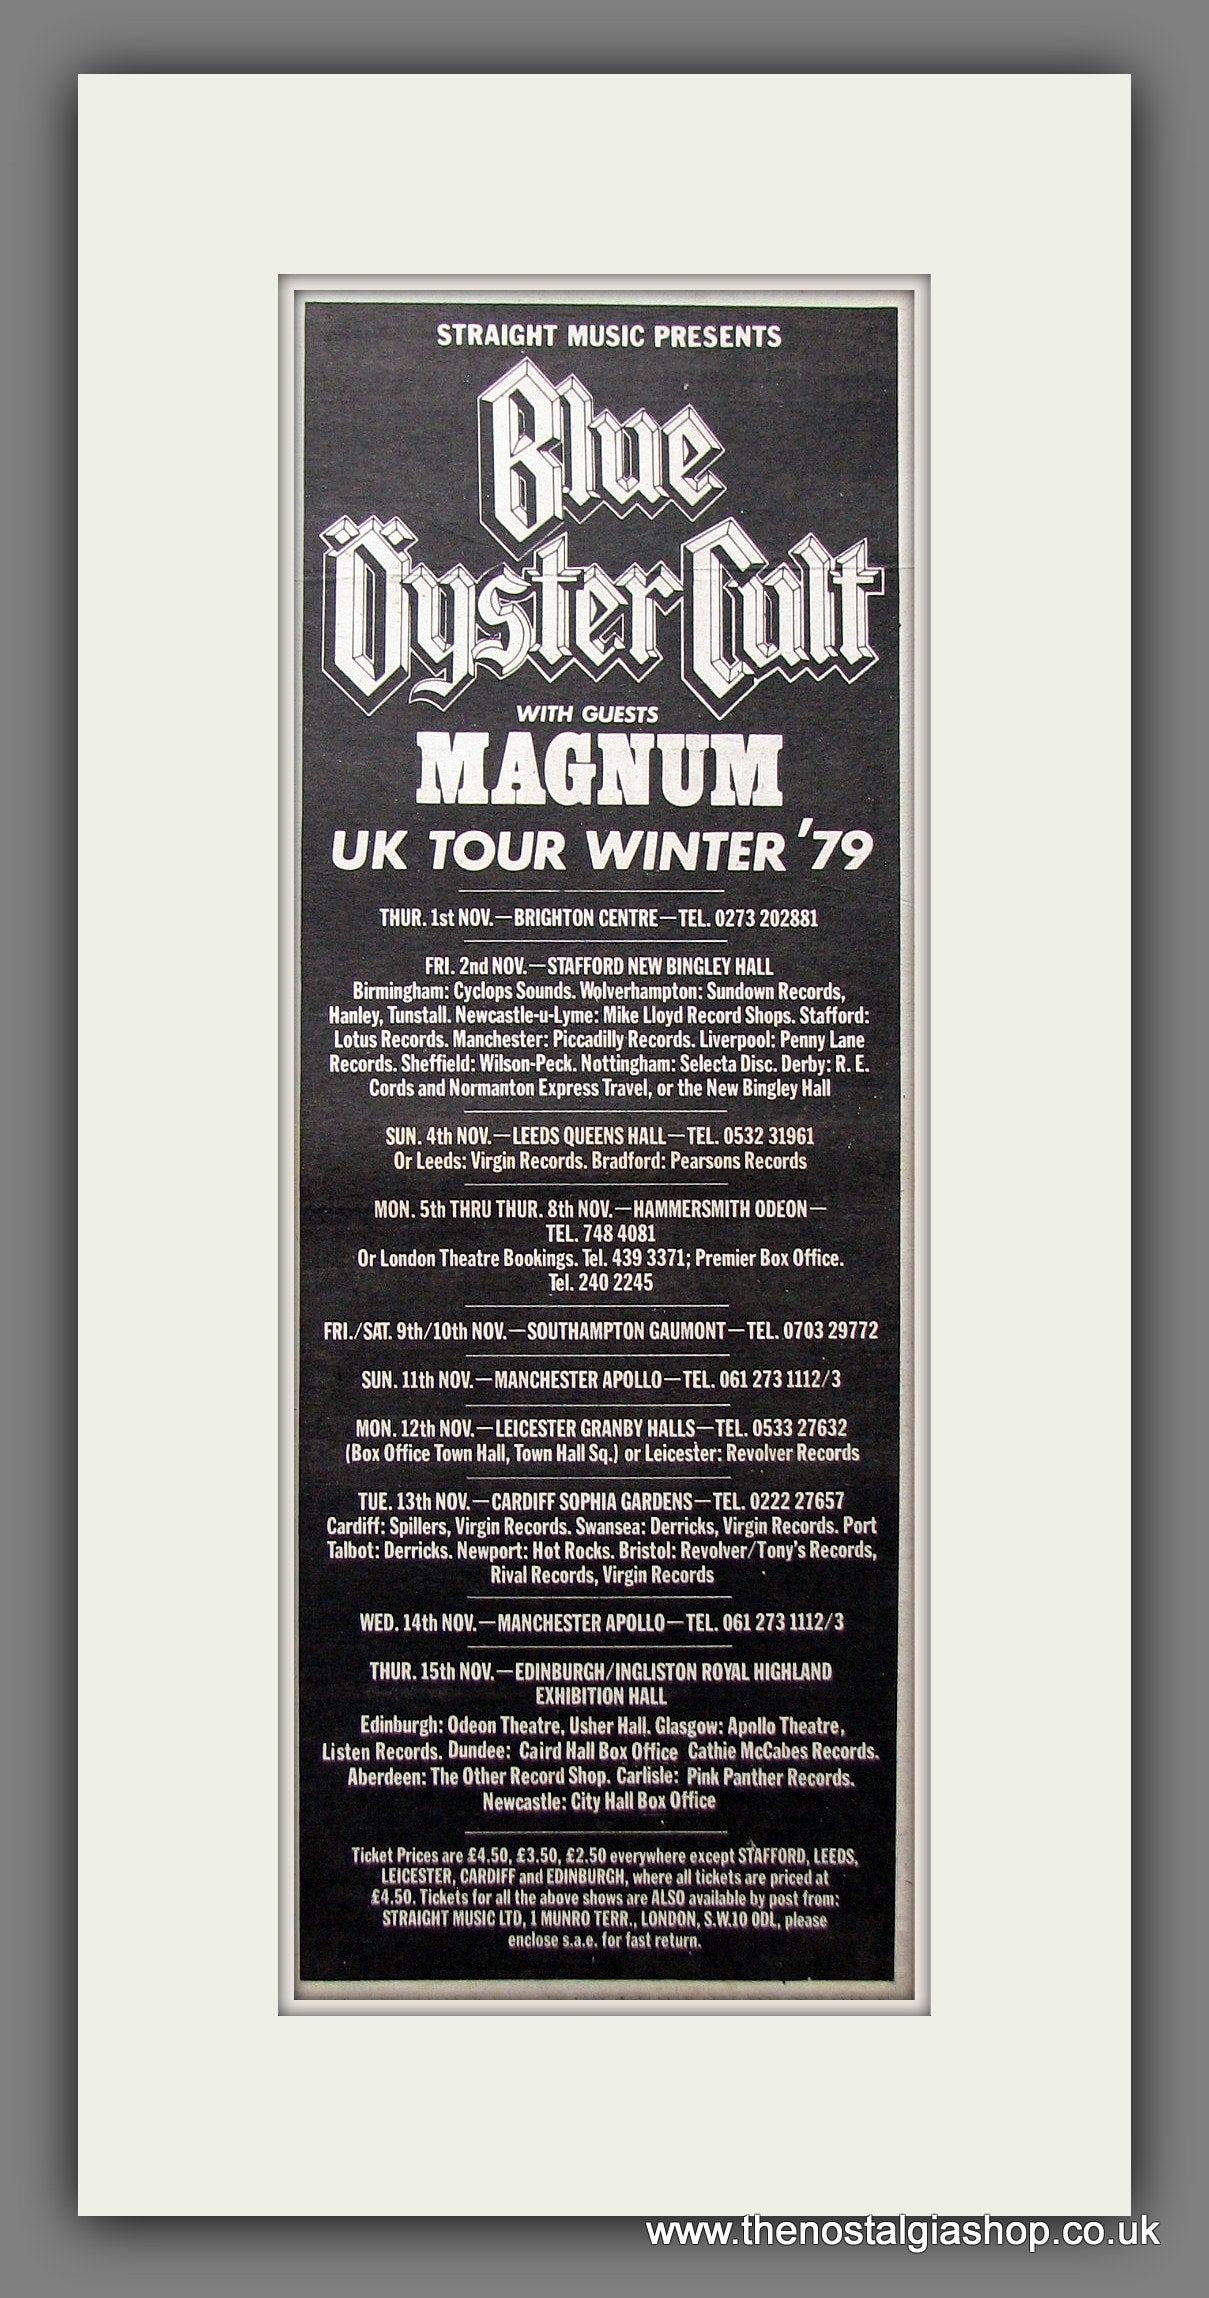 Blue Oyster Cult. UK Tour with Magnum. Original Advert 1979 (ref AD200189)